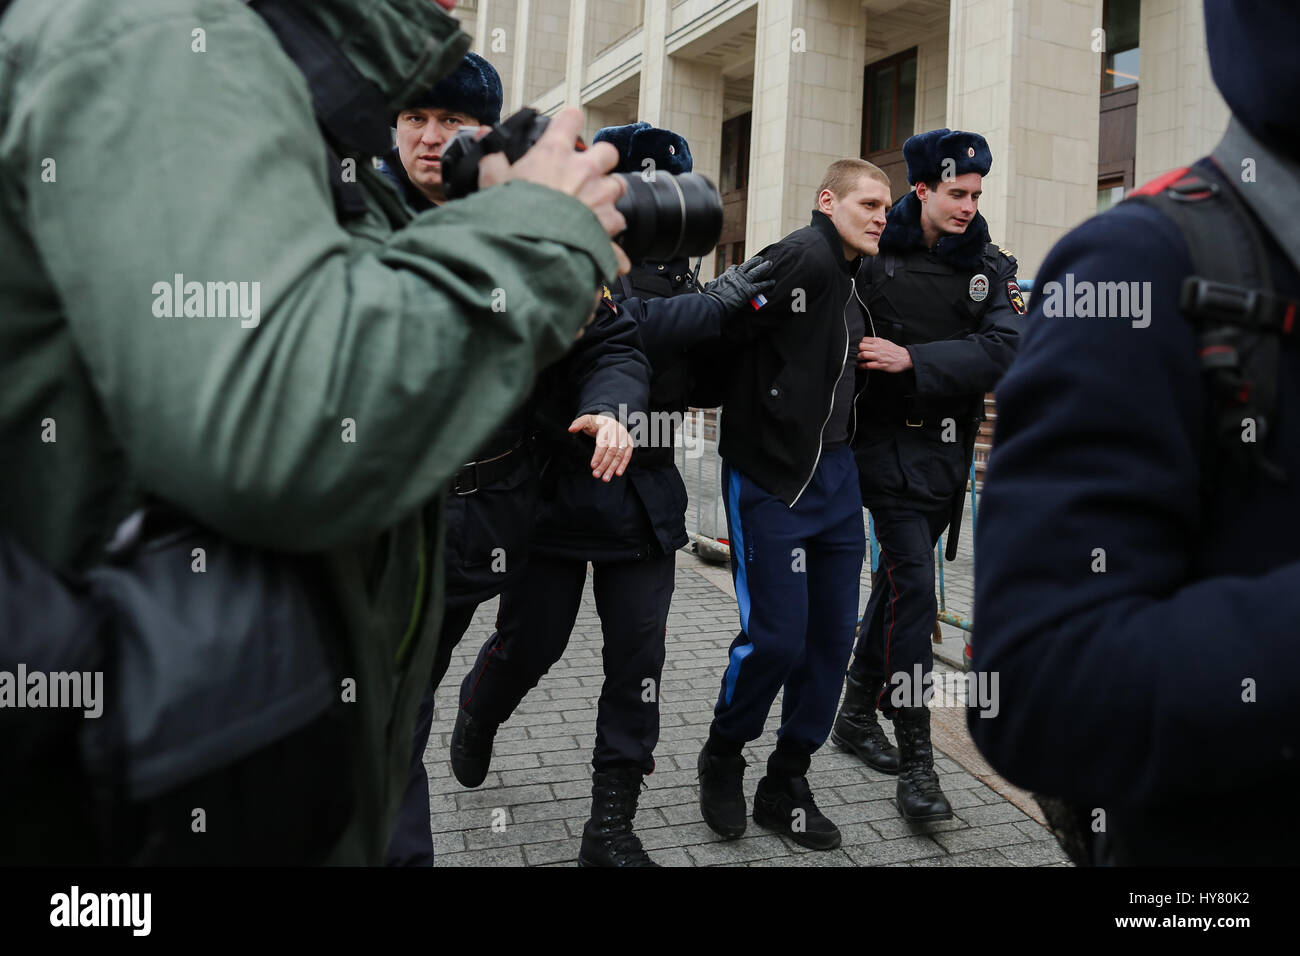 Moscow, Russia. 2nd Apr, 2017. Police arrests a man during an unsanctioned rally on Manezhnaya square in Moscow, Russia, on April 2, 2017. Police detained more than 20 participants at unsanctioned rallies in center of Moscow on Sunday. Credit: Evgeny Sinitsyn/Xinhua/Alamy Live News Stock Photo